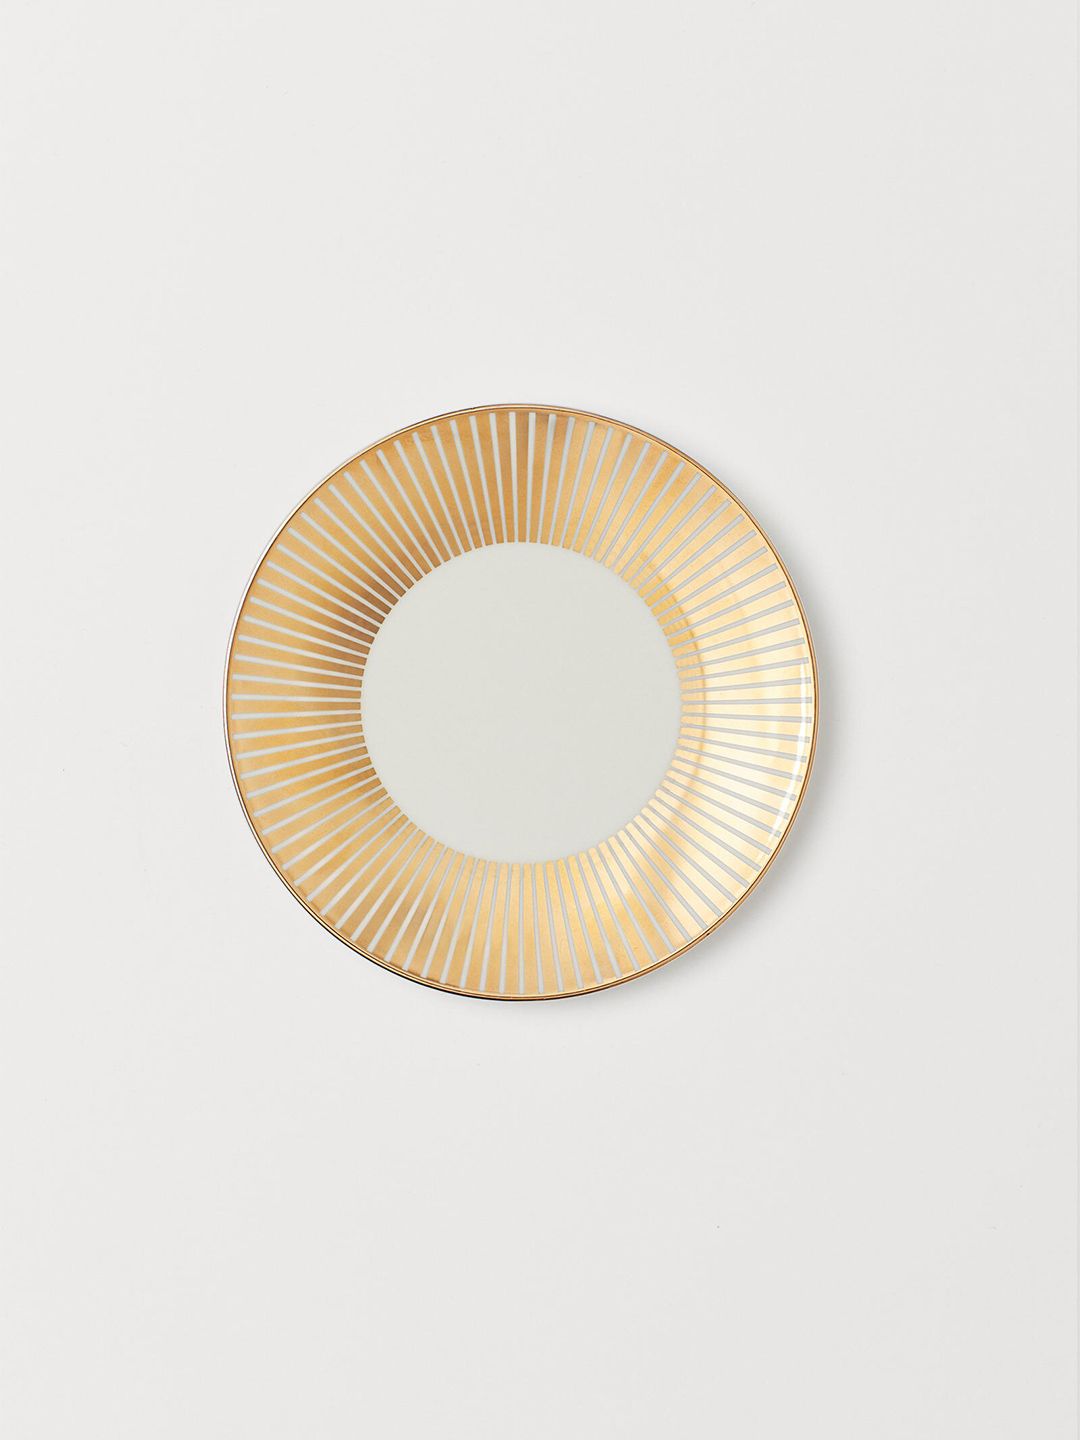 H&M Patterned Porcelain Saucer Price in India